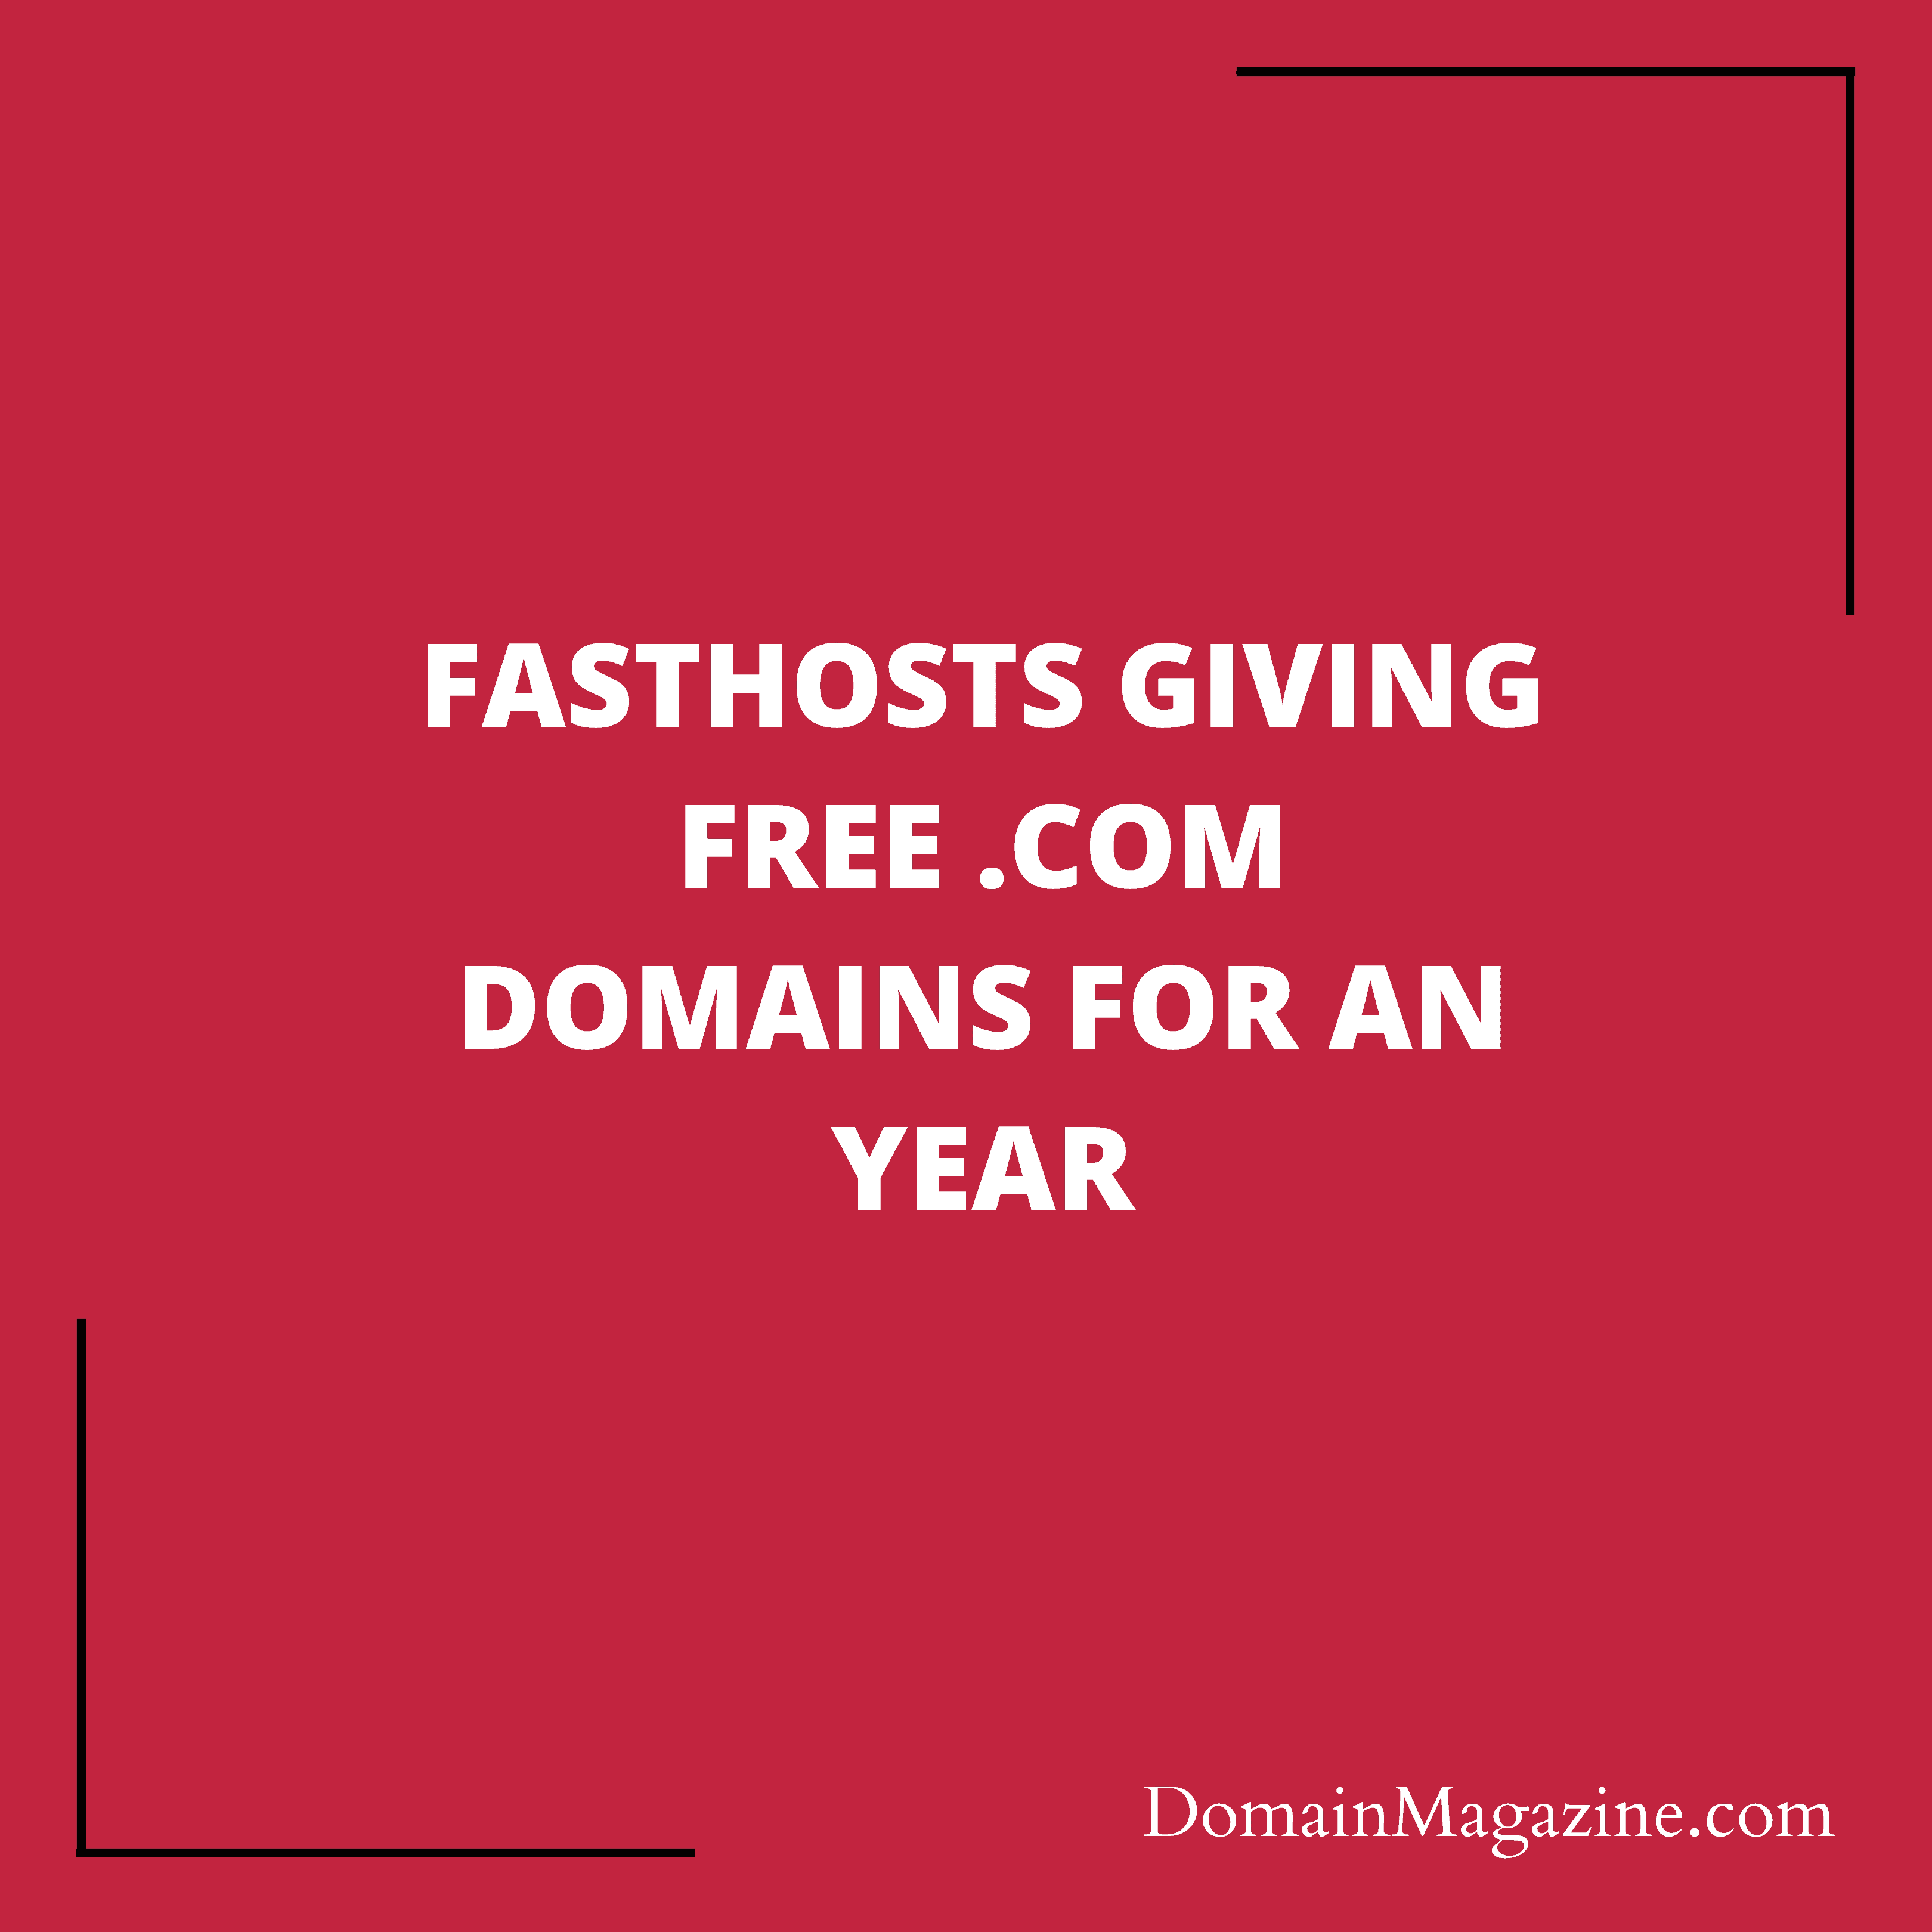 Fasthosts giving free .com domains for an year